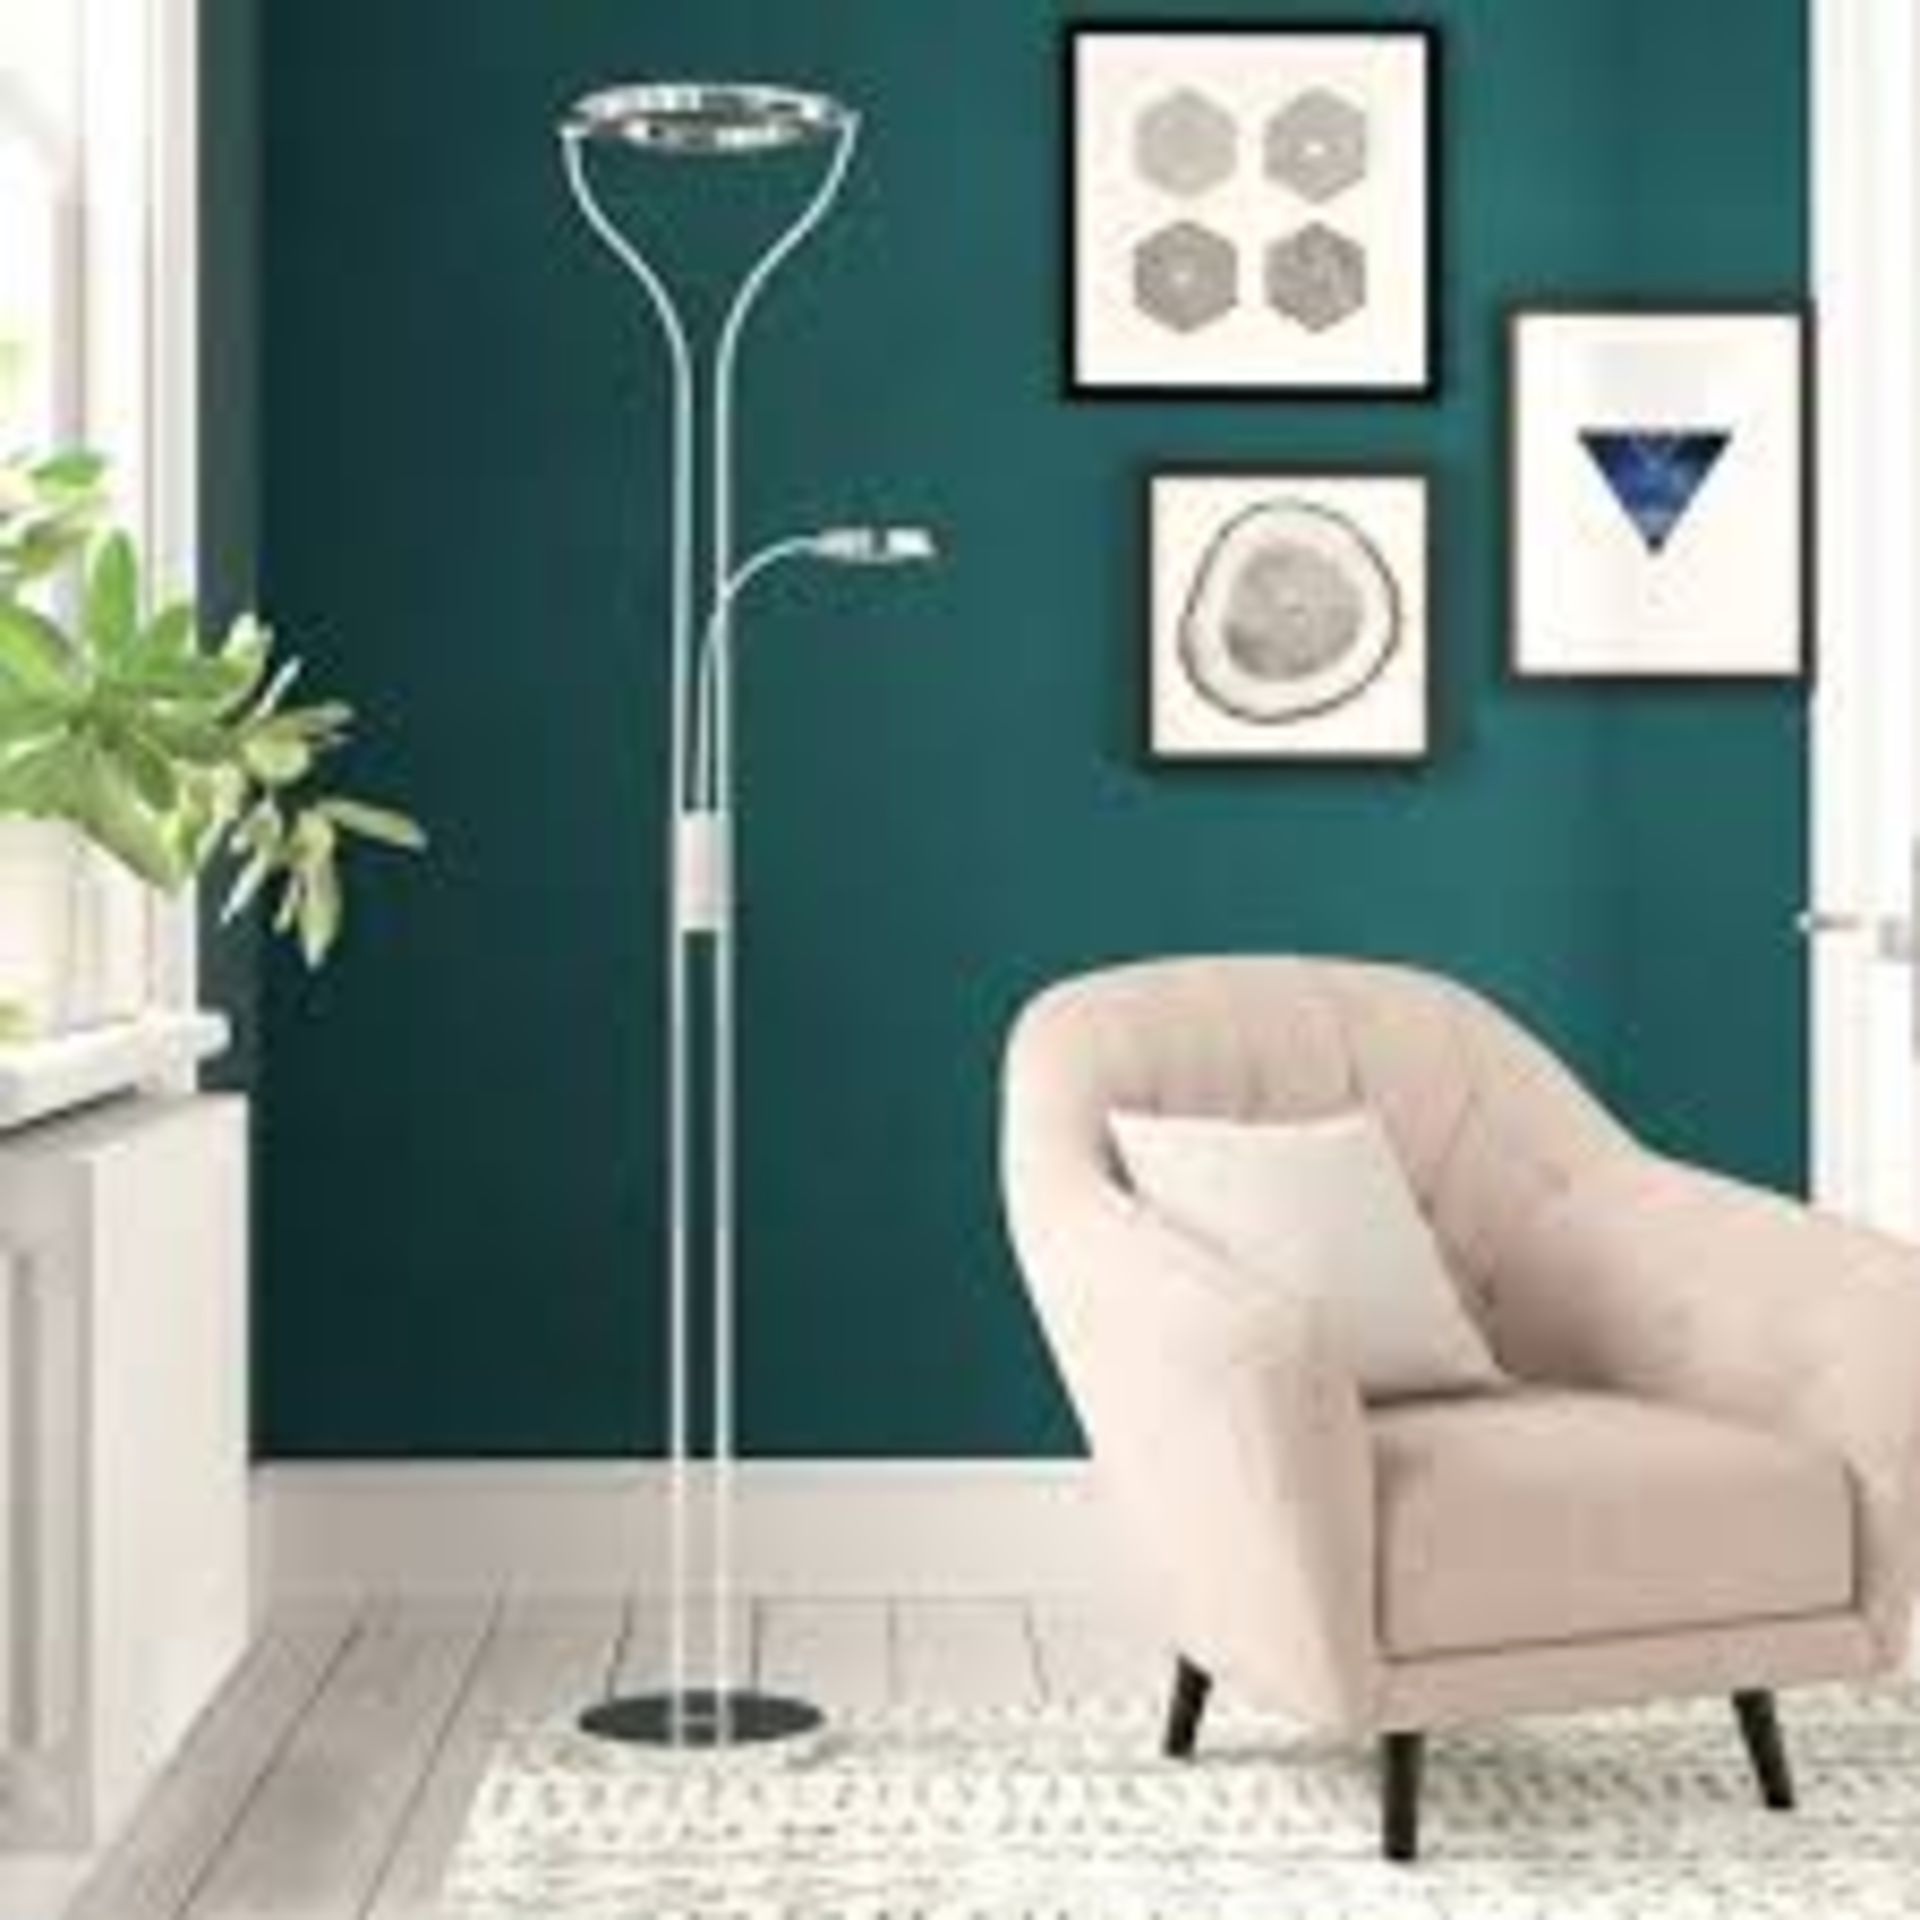 Boxed Jelissa Floor Lamp RRP £35 (Appraisals Available Upon Request)